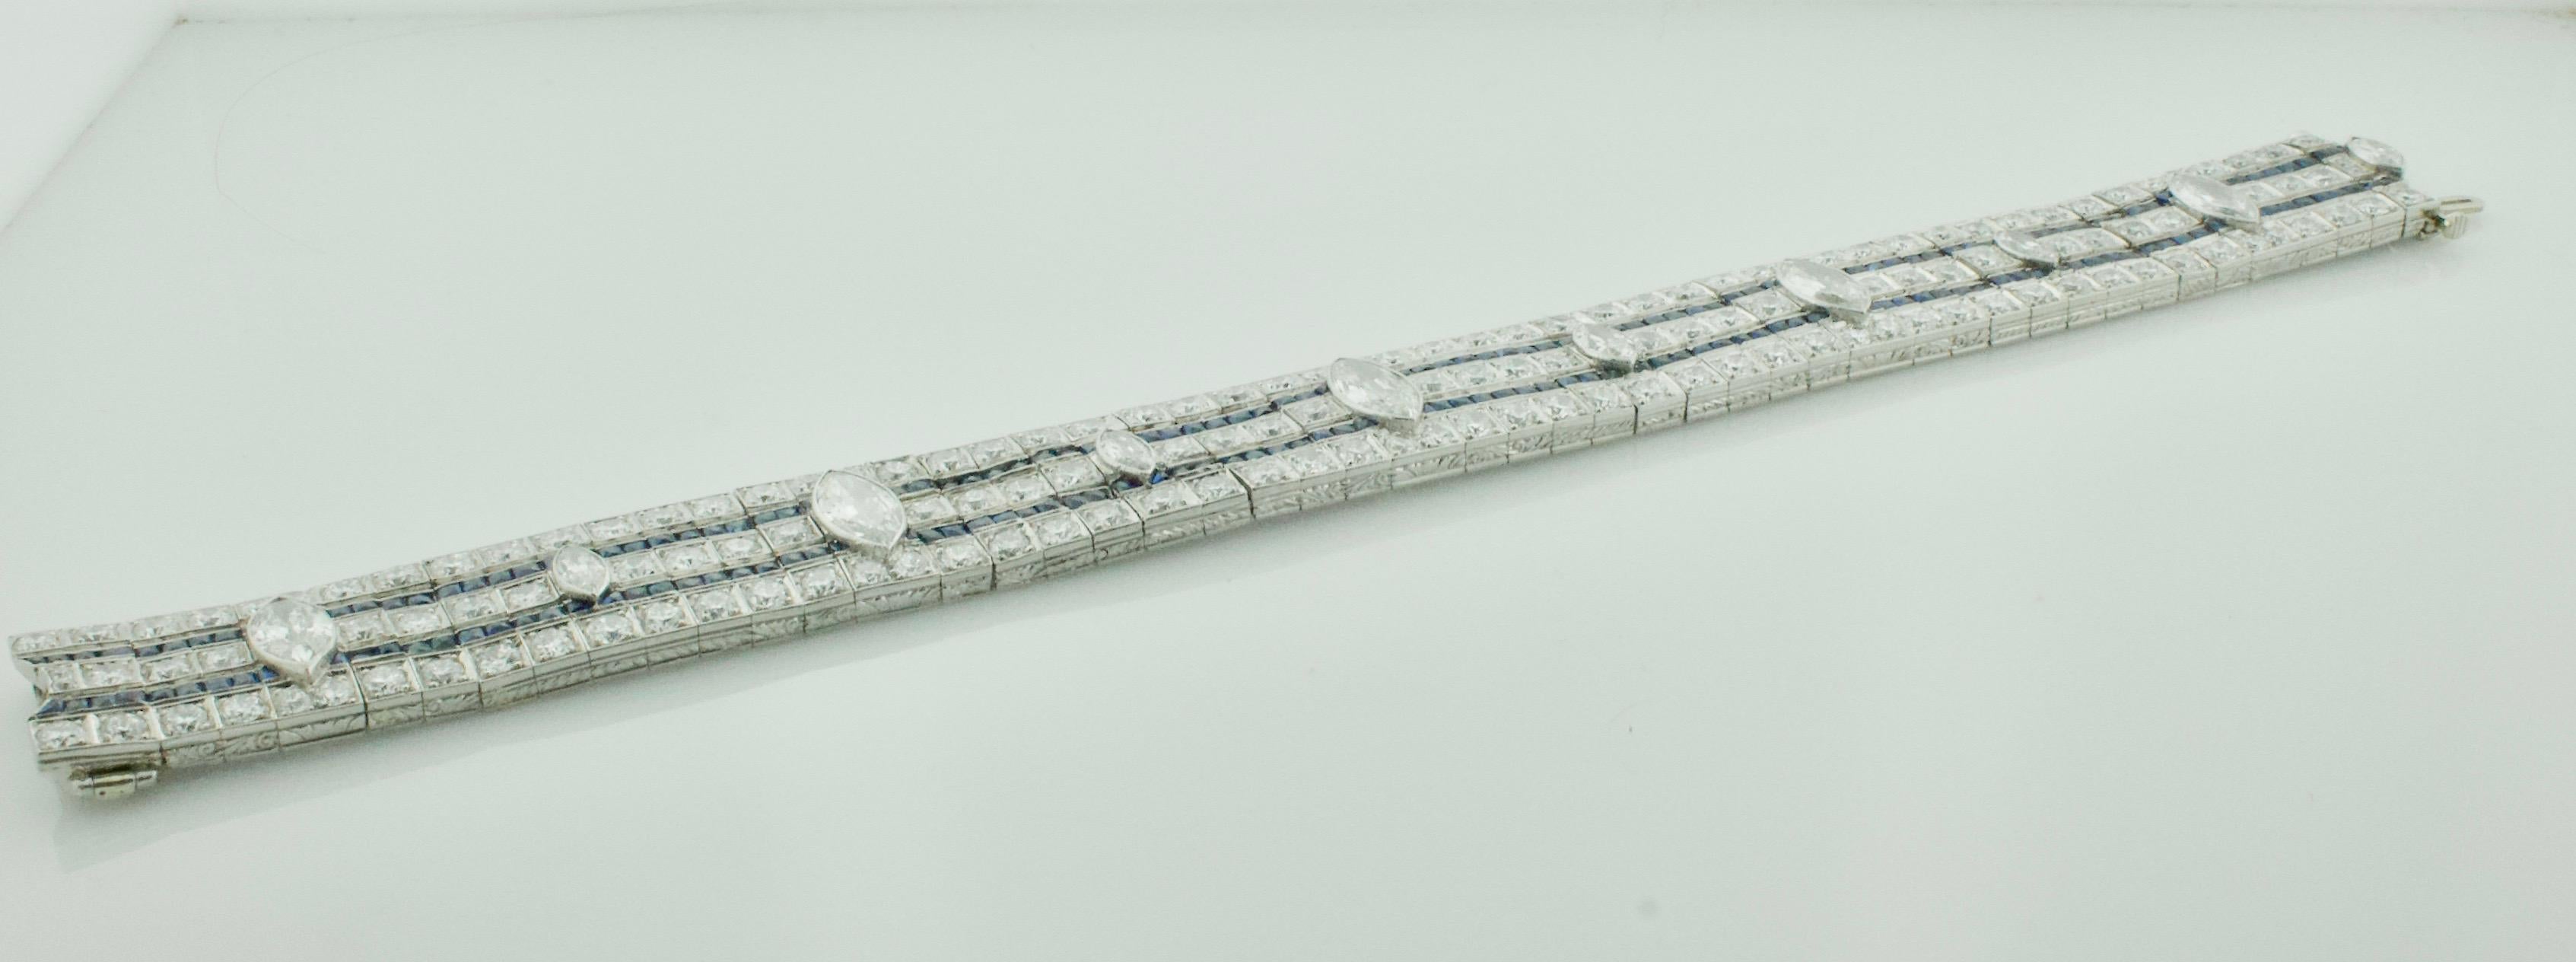 Important Platinum Diamond and Sapphire Art Deco Bracelet Circa 1920's 20.00 Carats
5 Old Mine Marquise Cut Diamonds Weighing 3.60 Carats Approximately 
5 Old Mine Marquise Cut Diamonds Weighing 1.25 Carats Approximately 
88 Old European Cut